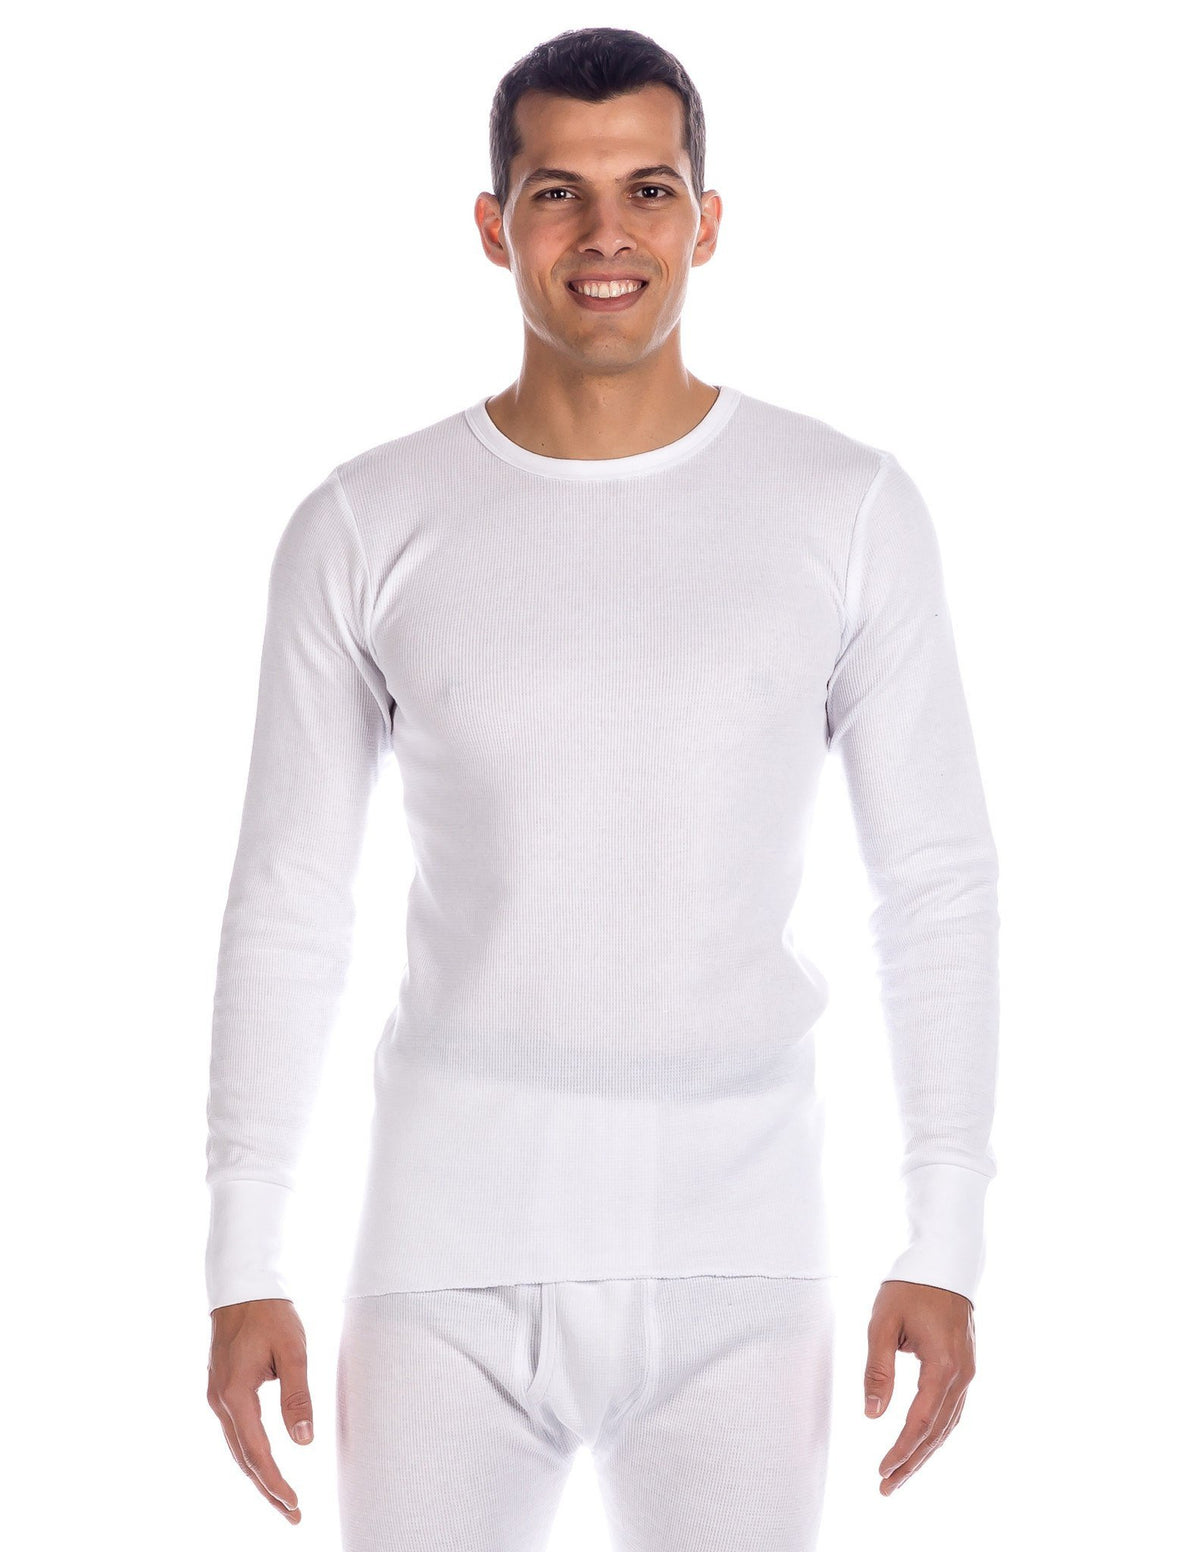 Men's Classic Waffle Knit Thermal Crew Top - White